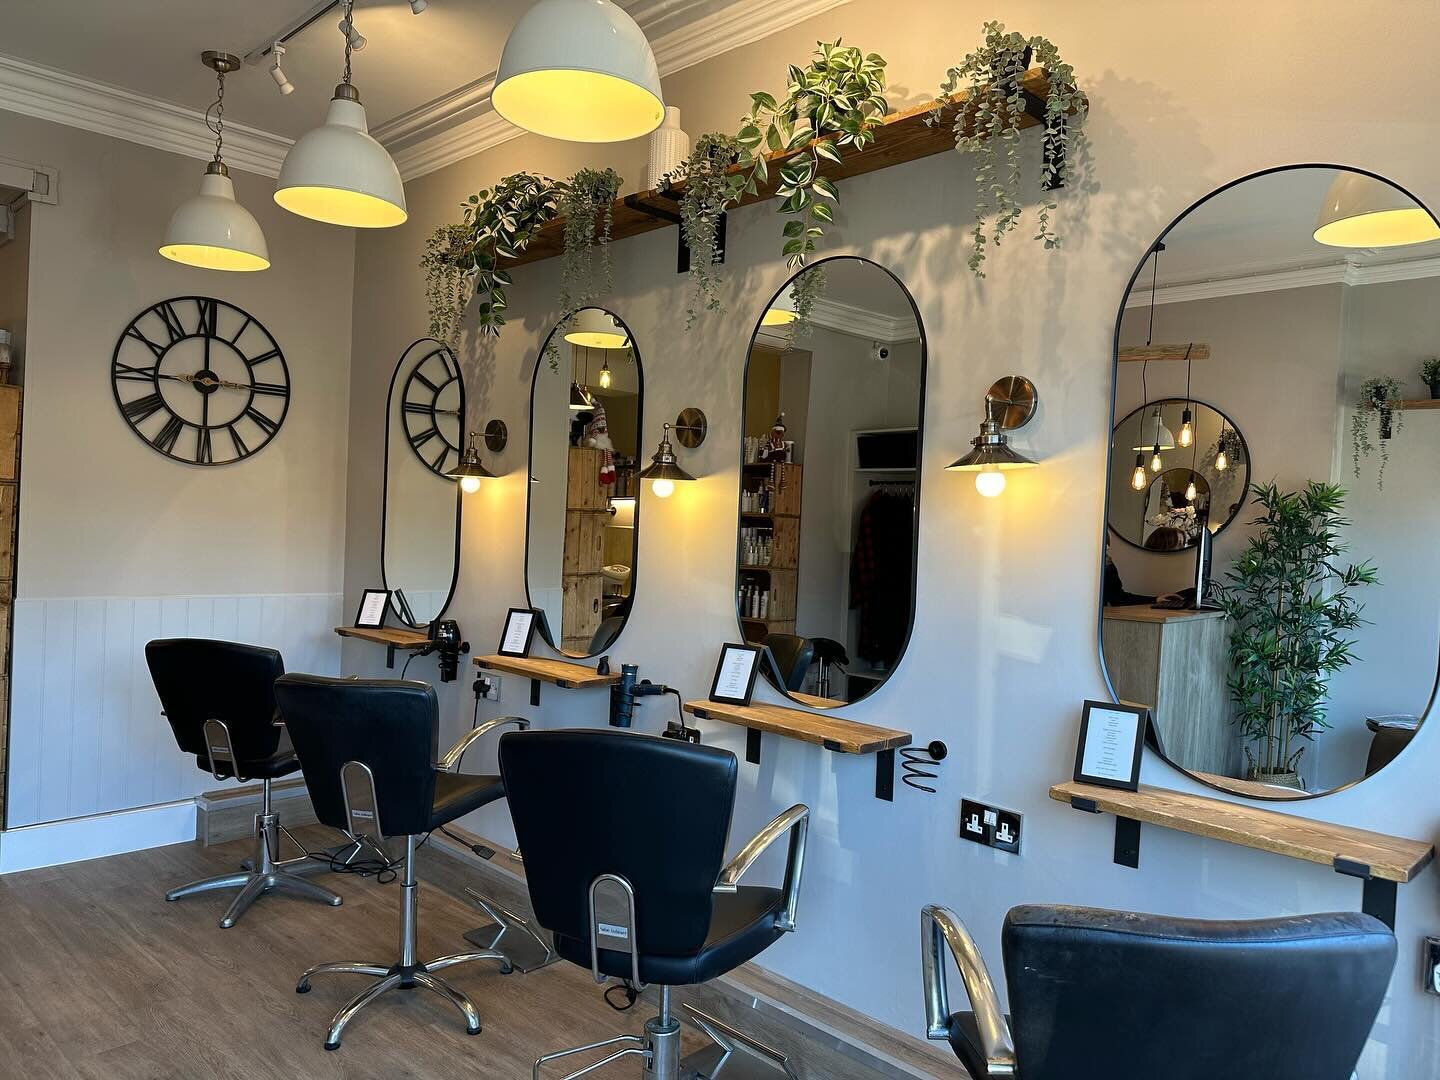 Who&rsquo;s looking forward to coming to see us in our fresh new salon? 🎄 

Call to book on 01582 767308